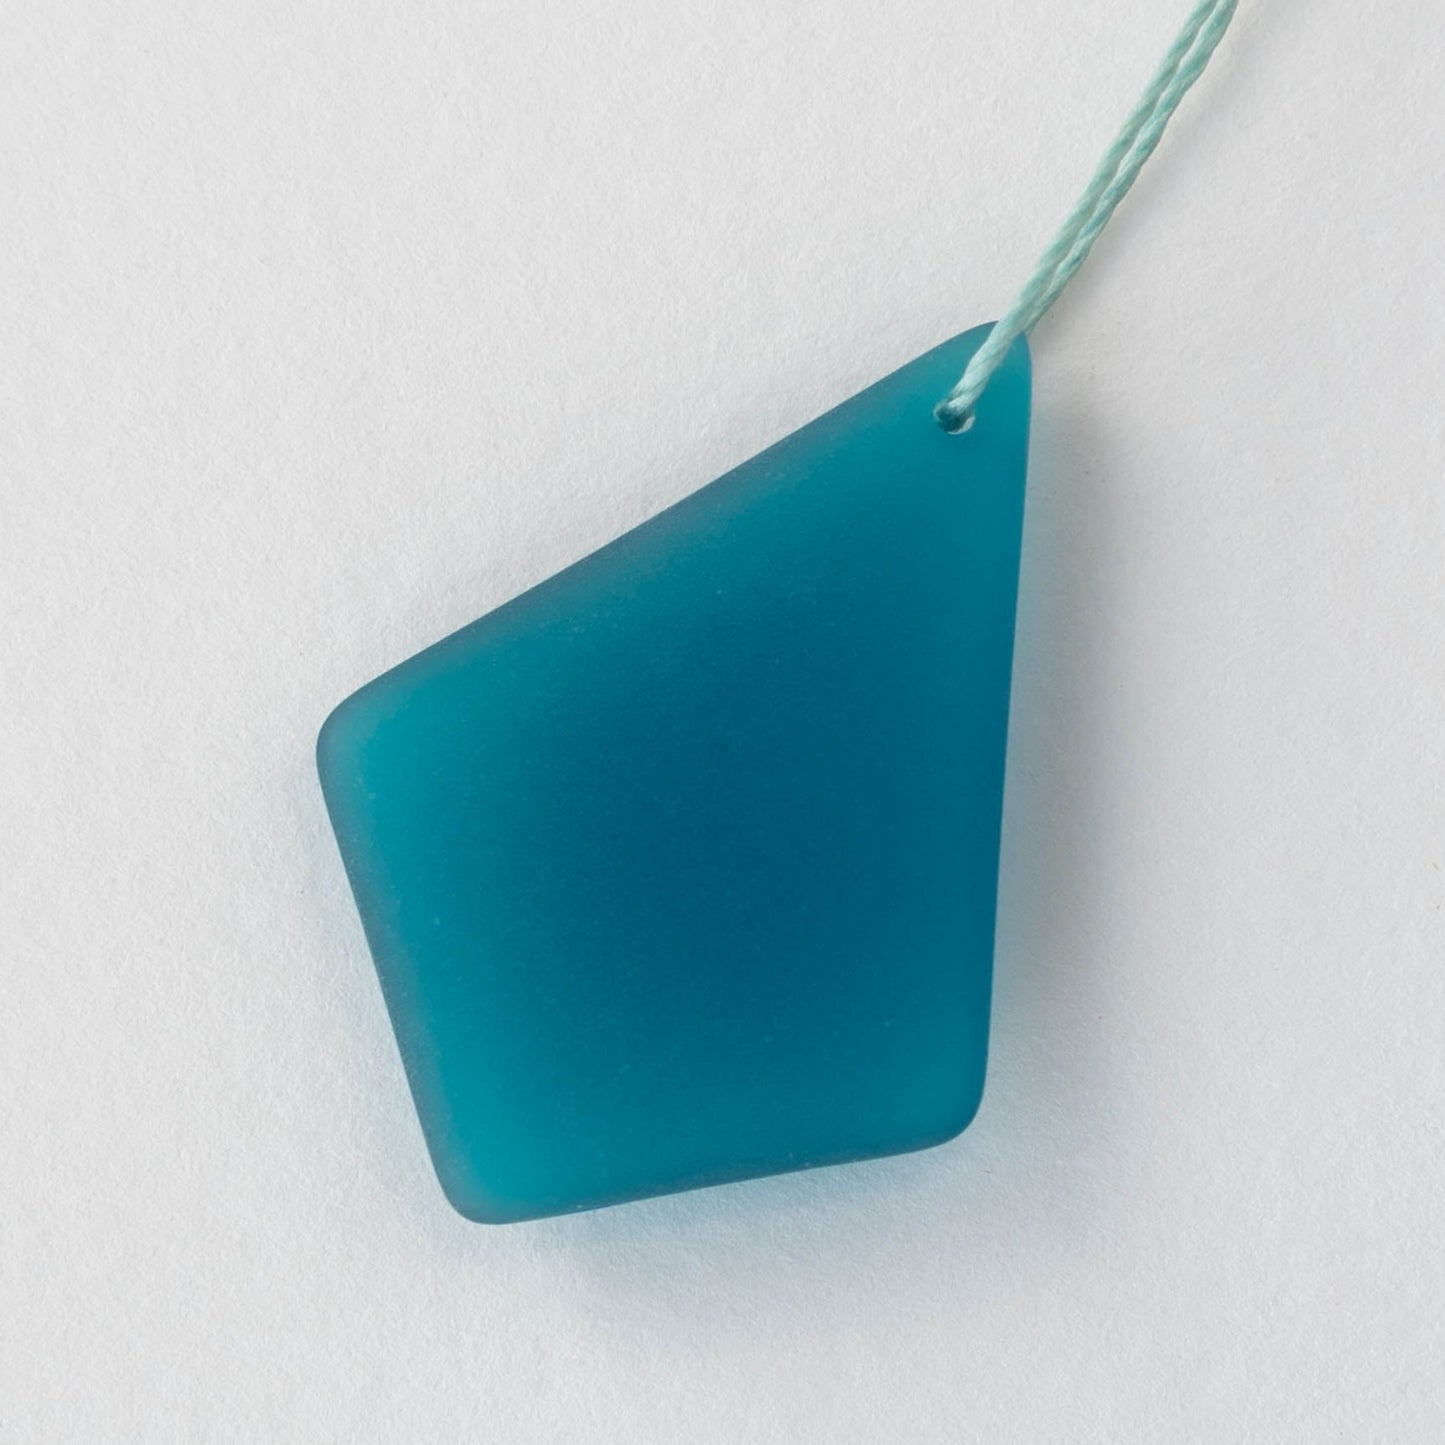 26x36mm Frosted Glass Diamond Pendants - Teal - 2 Beads